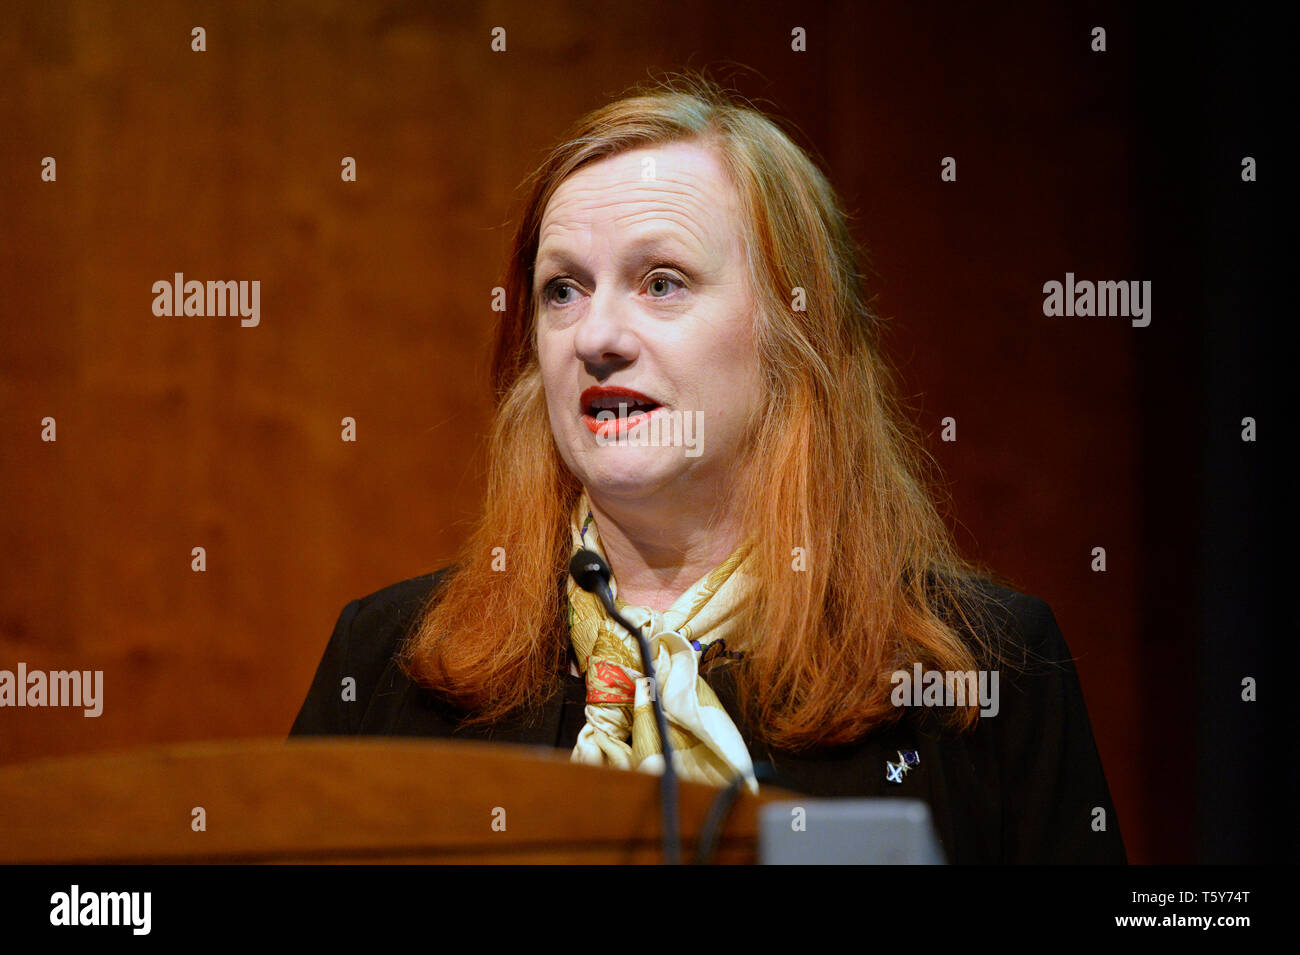 Edinburgh, Scotland, United Kingdom. 27th Apr, 2019. SNP MSP Joan McAlpine chairs a lunchtime fringe meeting on EU citizen's rights at the Scottish National Party's Spring Conference in the Edinburgh International Conference Centre. Credit: Ken Jack/Alamy Live News Stock Photo